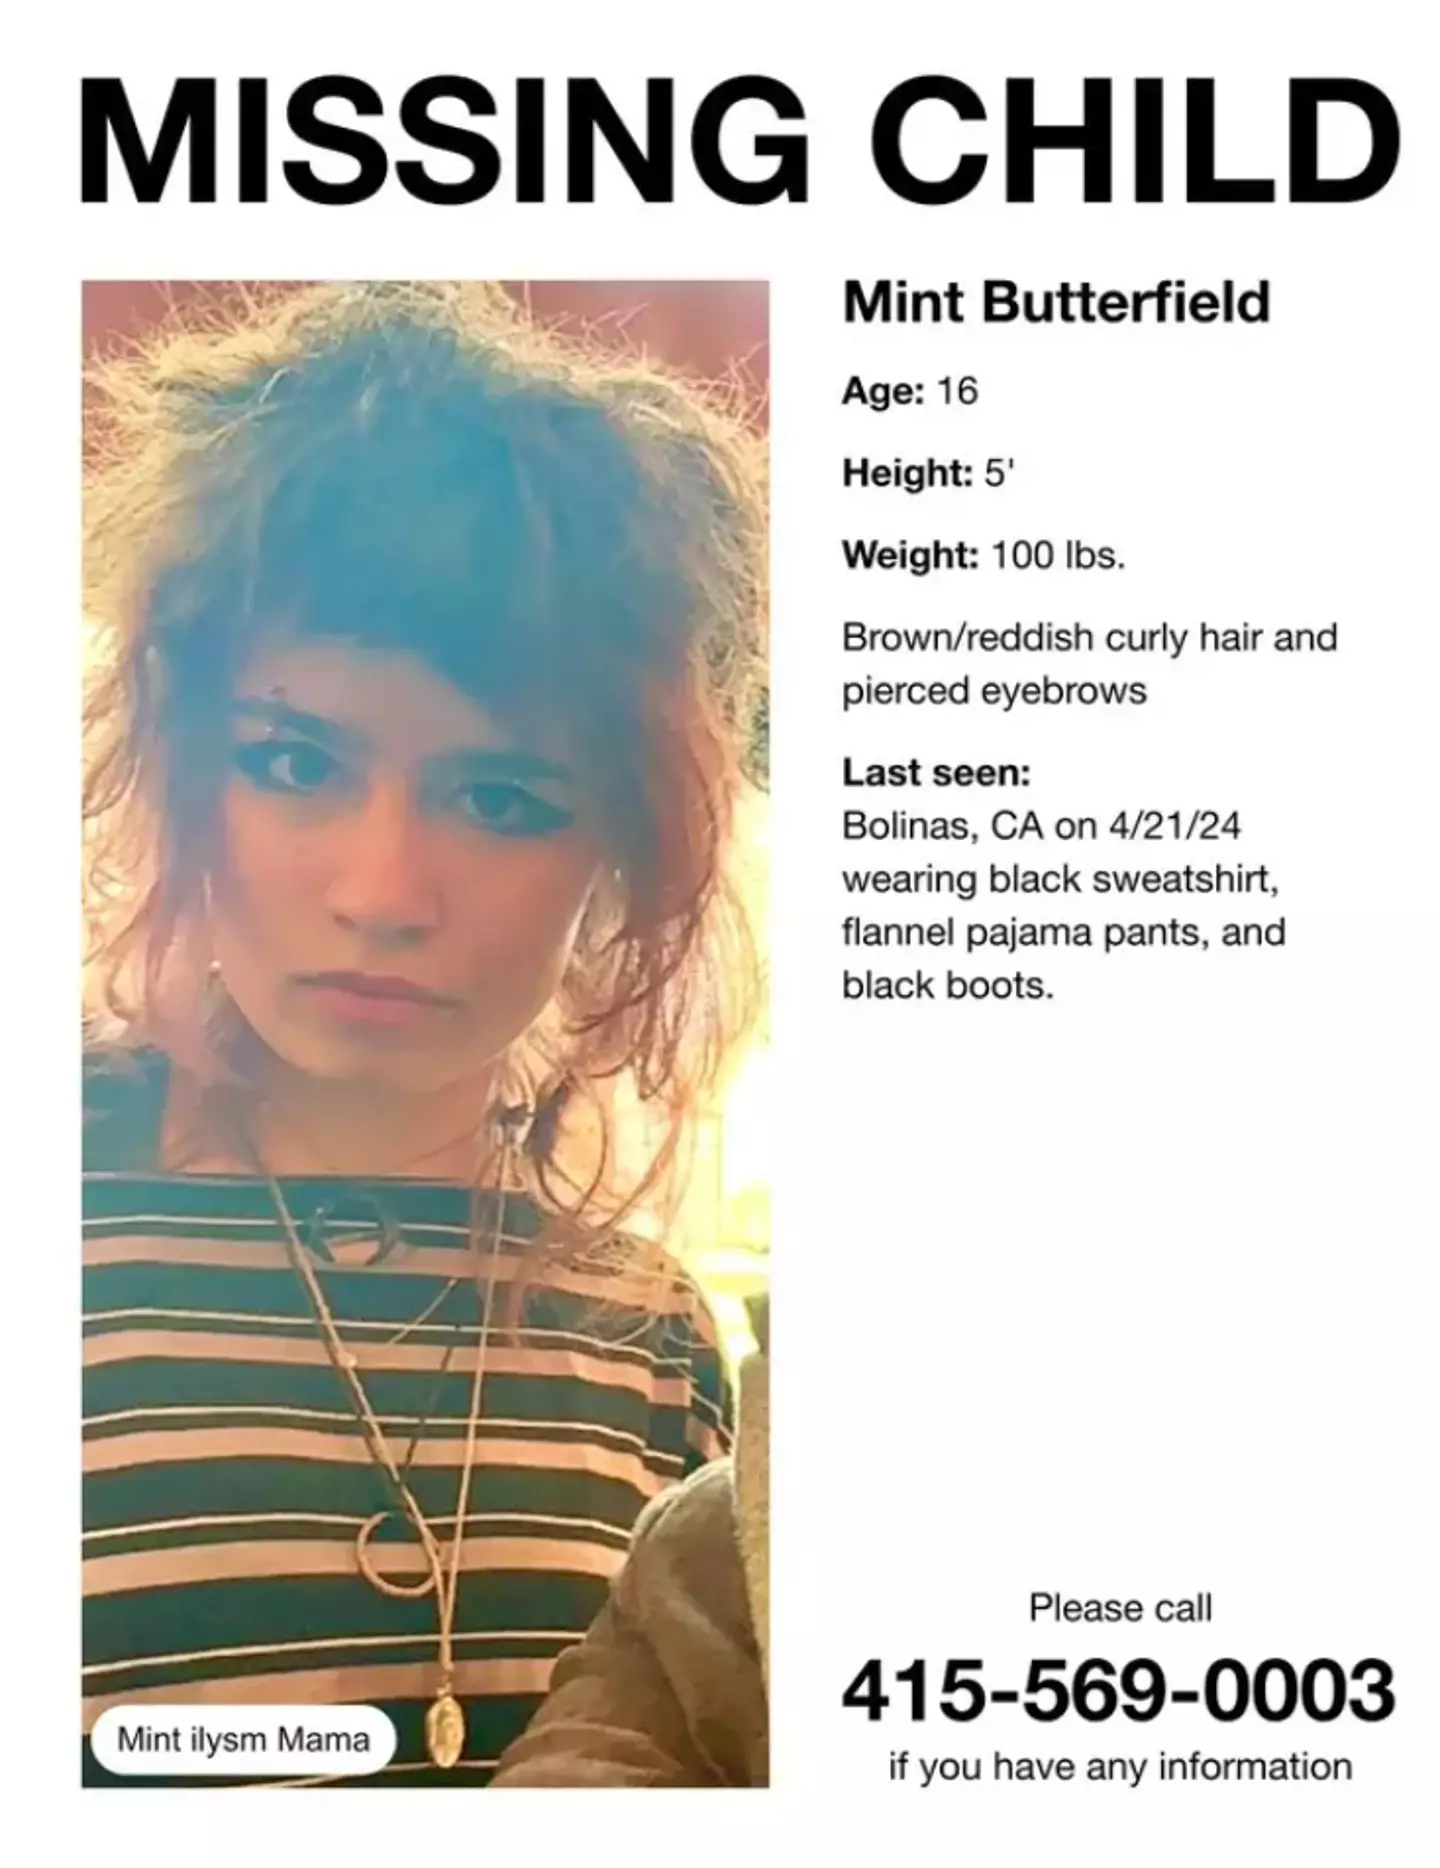 The teenager has been missing since last weekend. (Marin County Sheriff's Office)